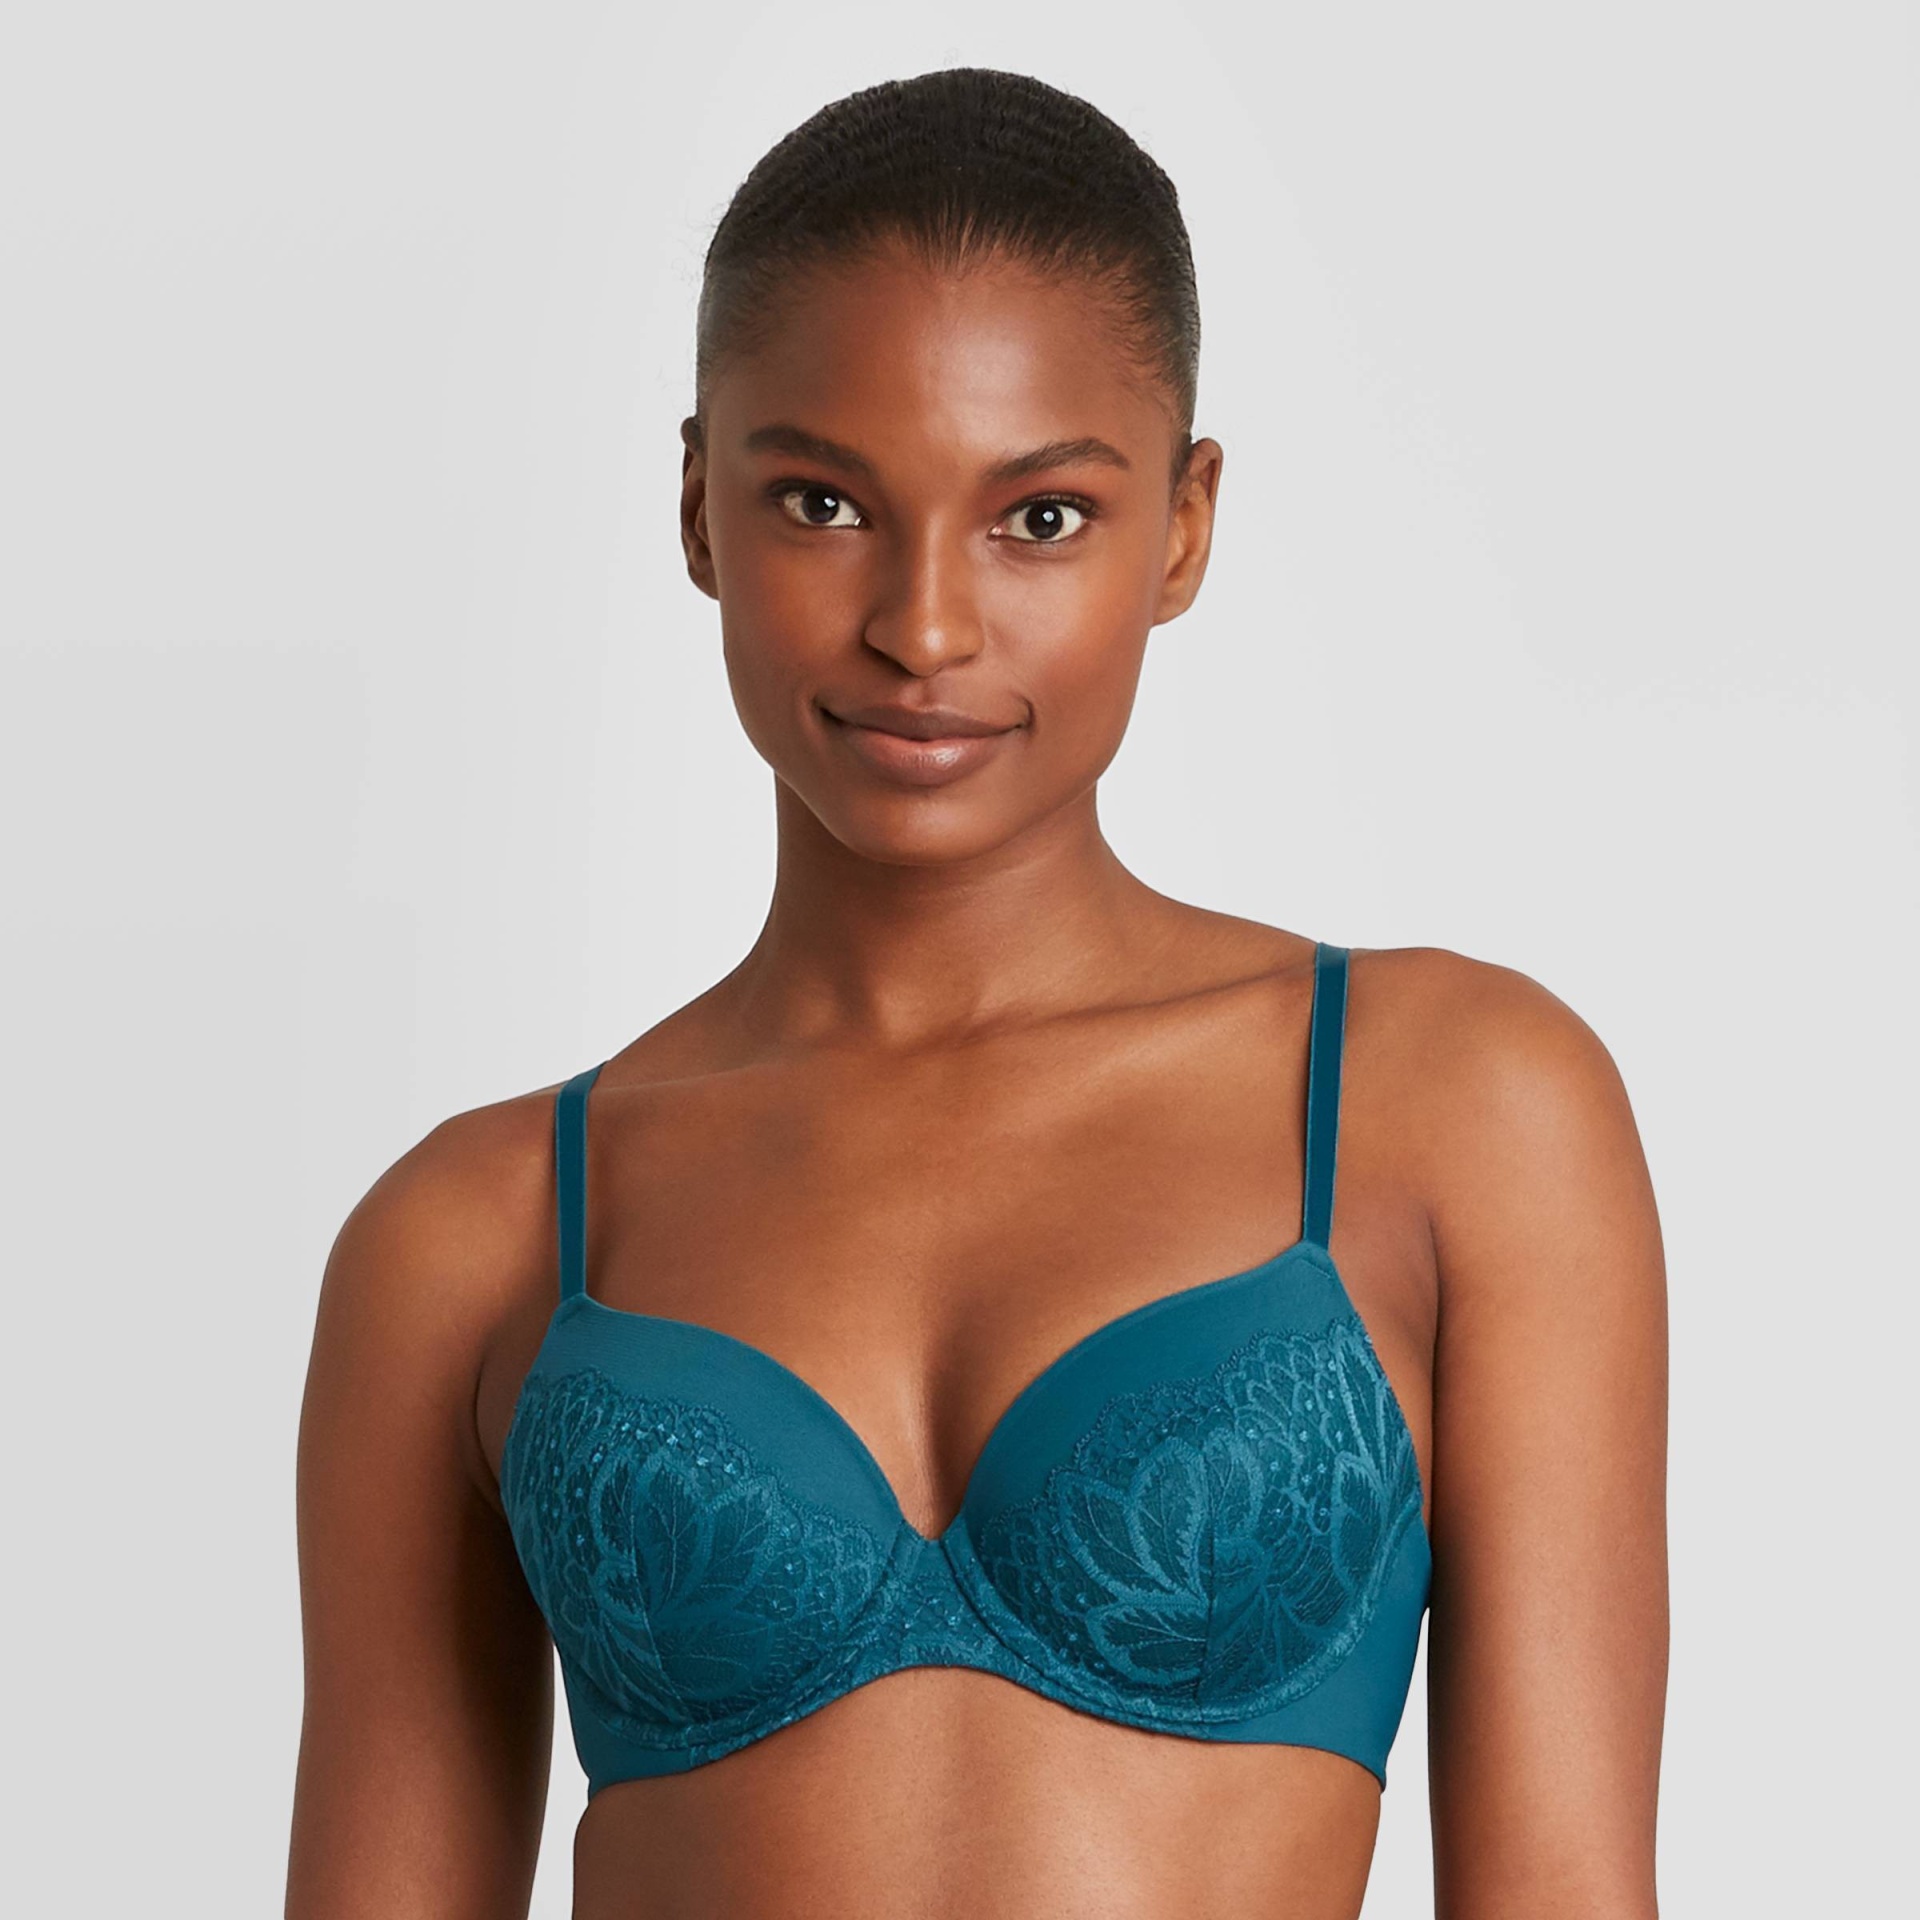 The Icon Collection 34B